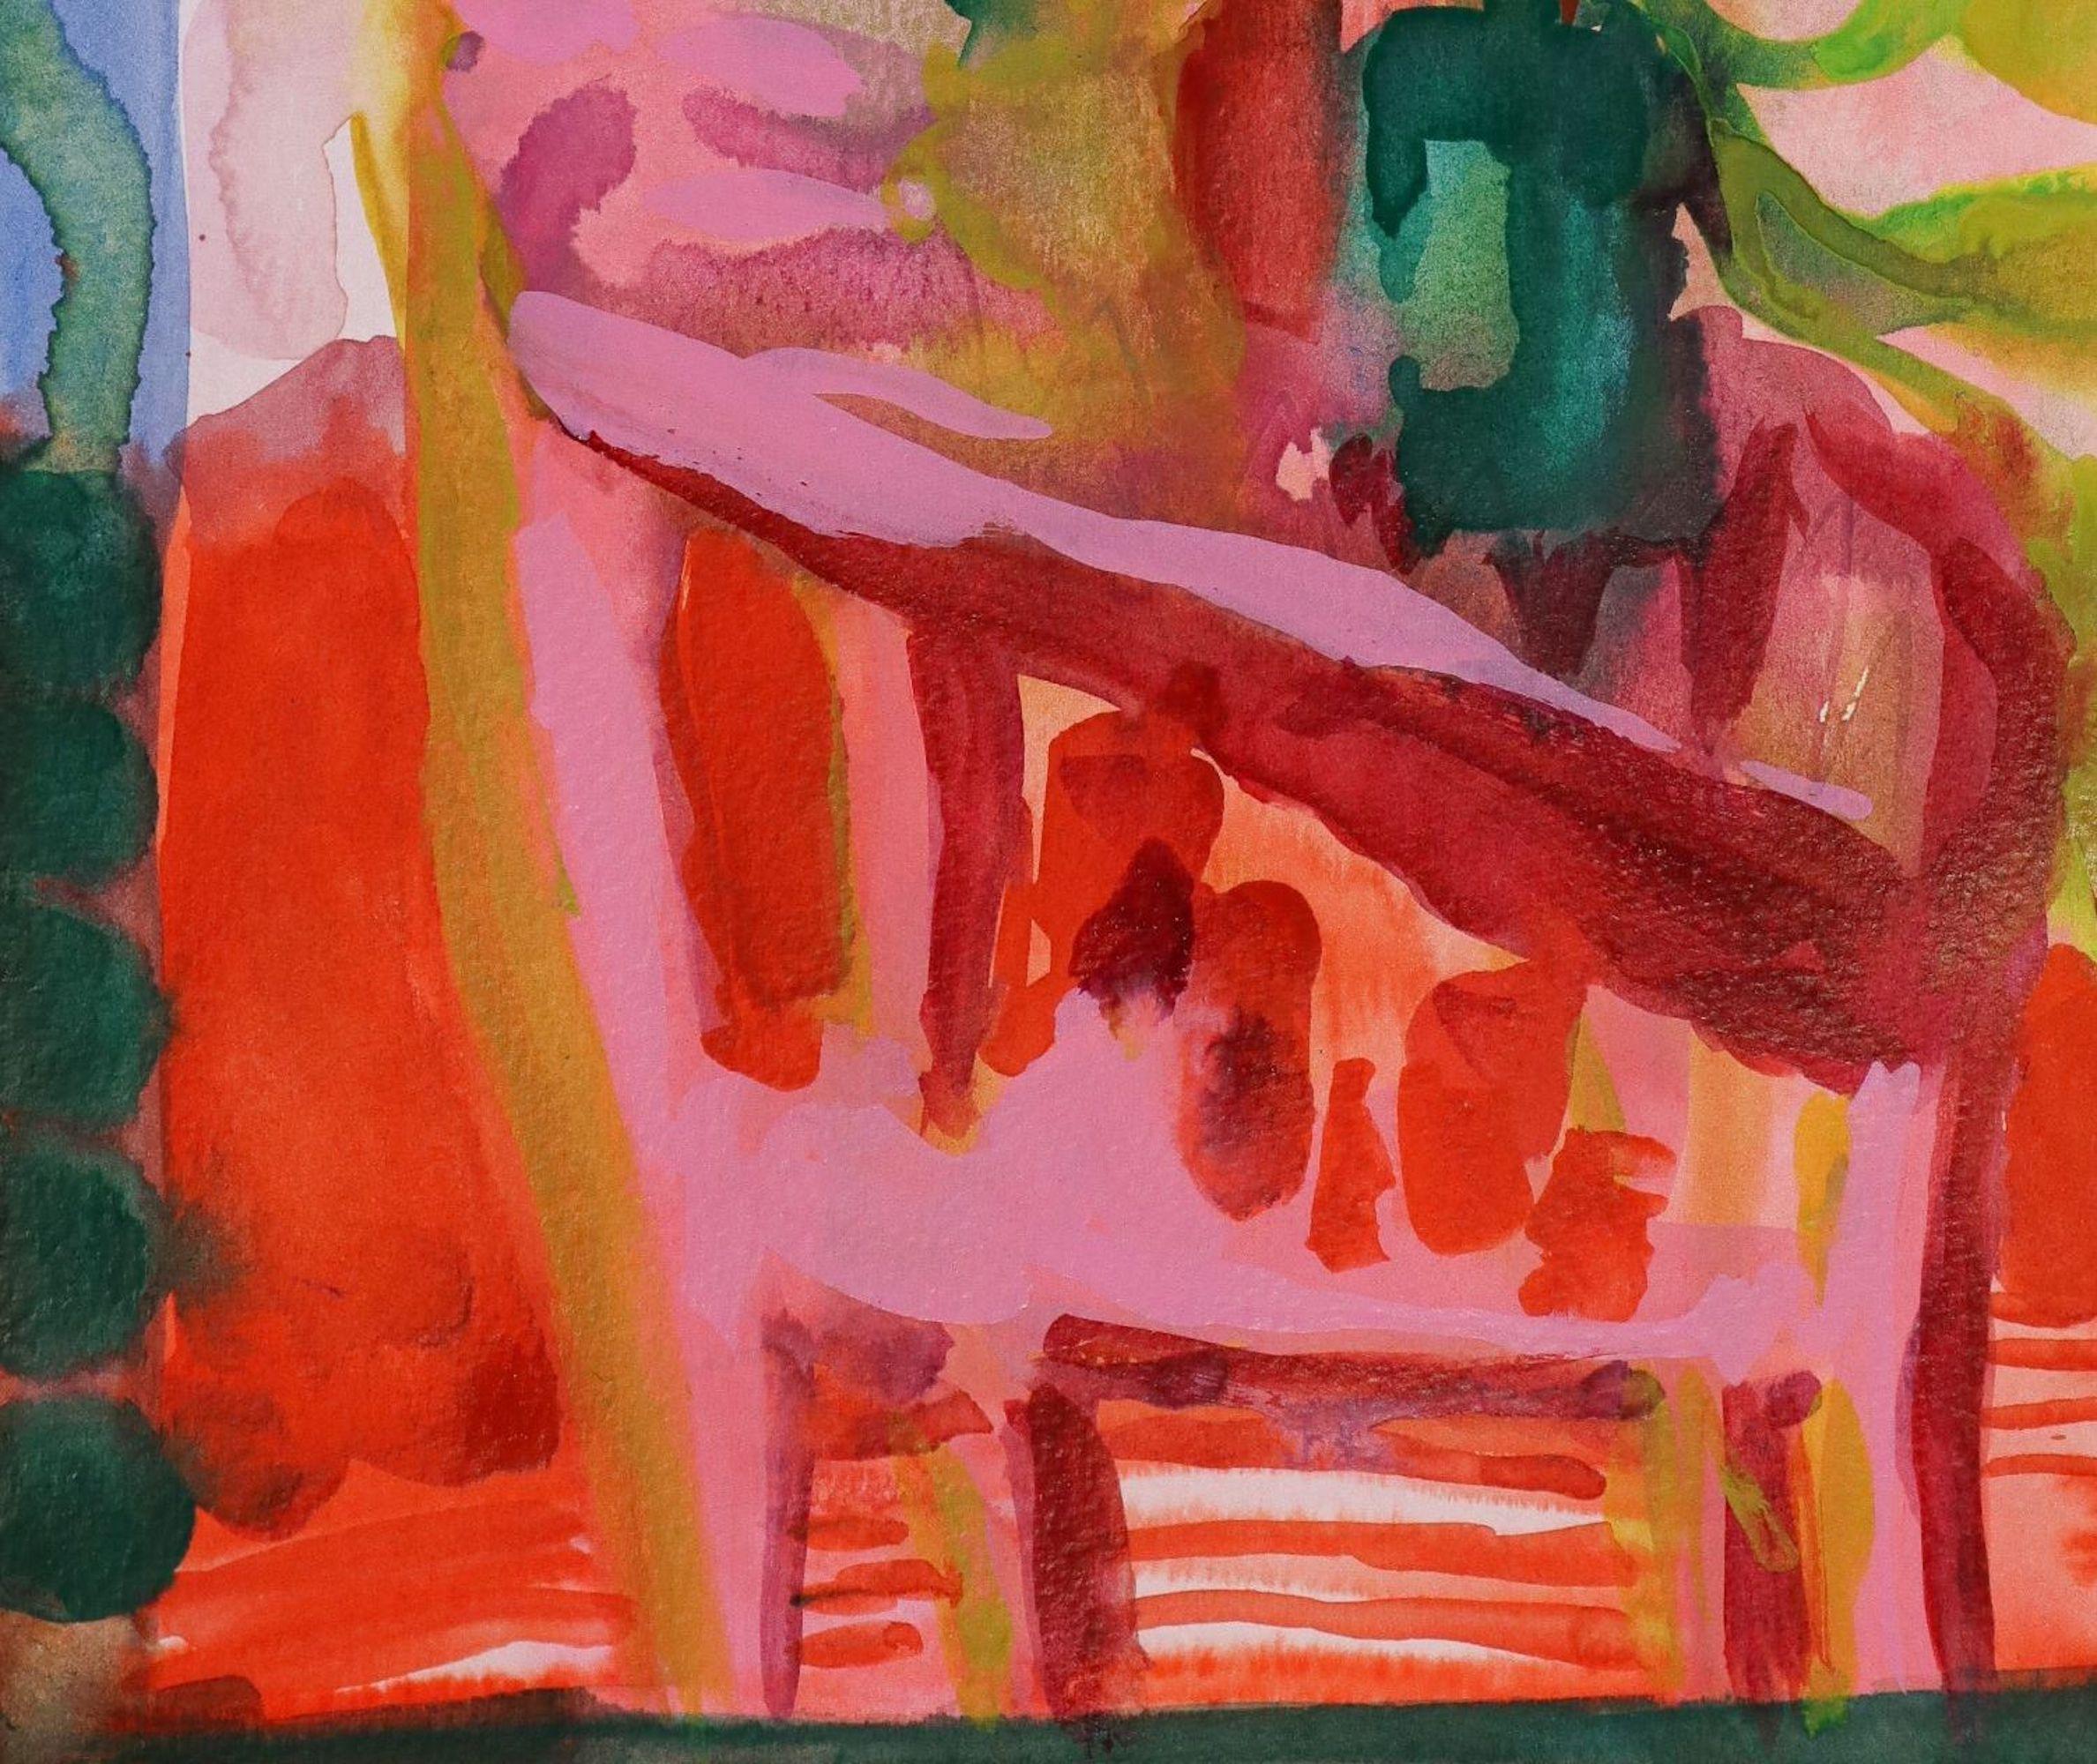 The Art Shelf by Lorna Sincalir [2022]
Signed by the artist
Gouache on paper
Image size: H:32 cm x W:24 cm x D:0.1cm
Please note that insitu images are purely an indication of how a piece may look
This peach-tainted painting depicts the joyous scene